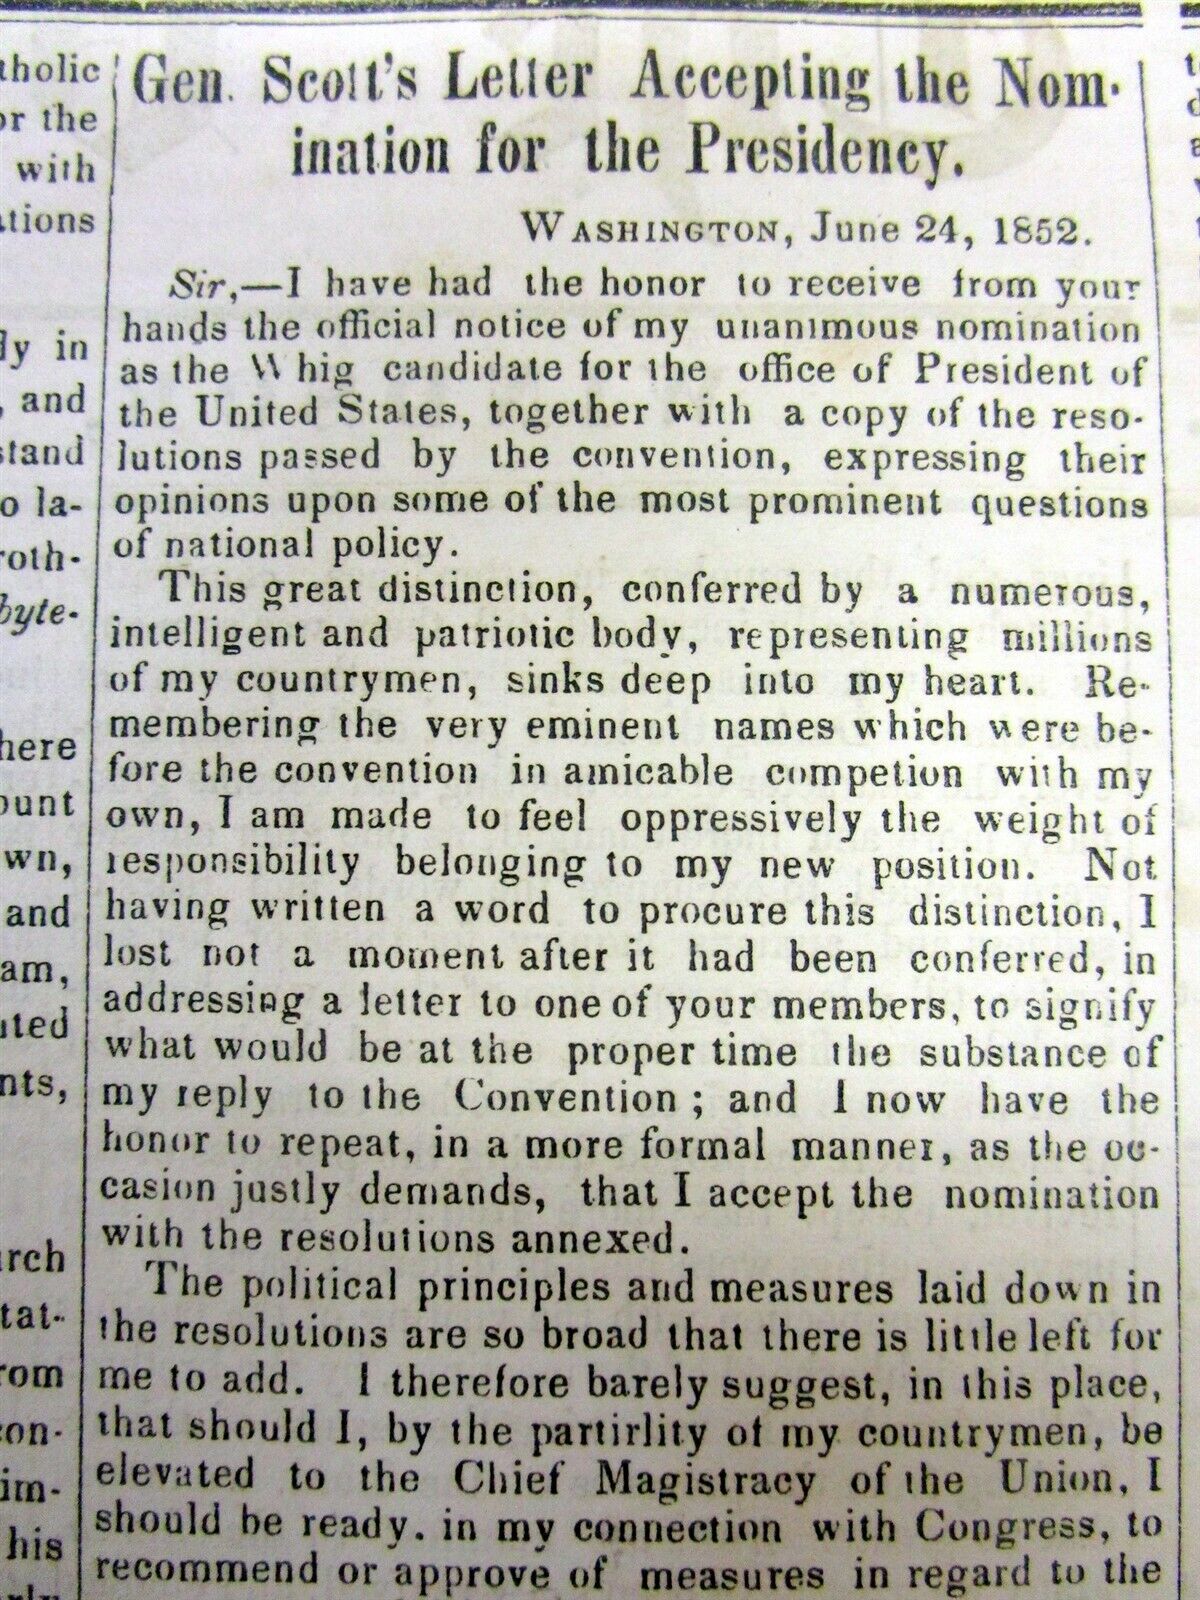 1852 newspaper WHIG PARTY NOMINATES WINFIELD SCOTT as Candidate for US PRESIDENT